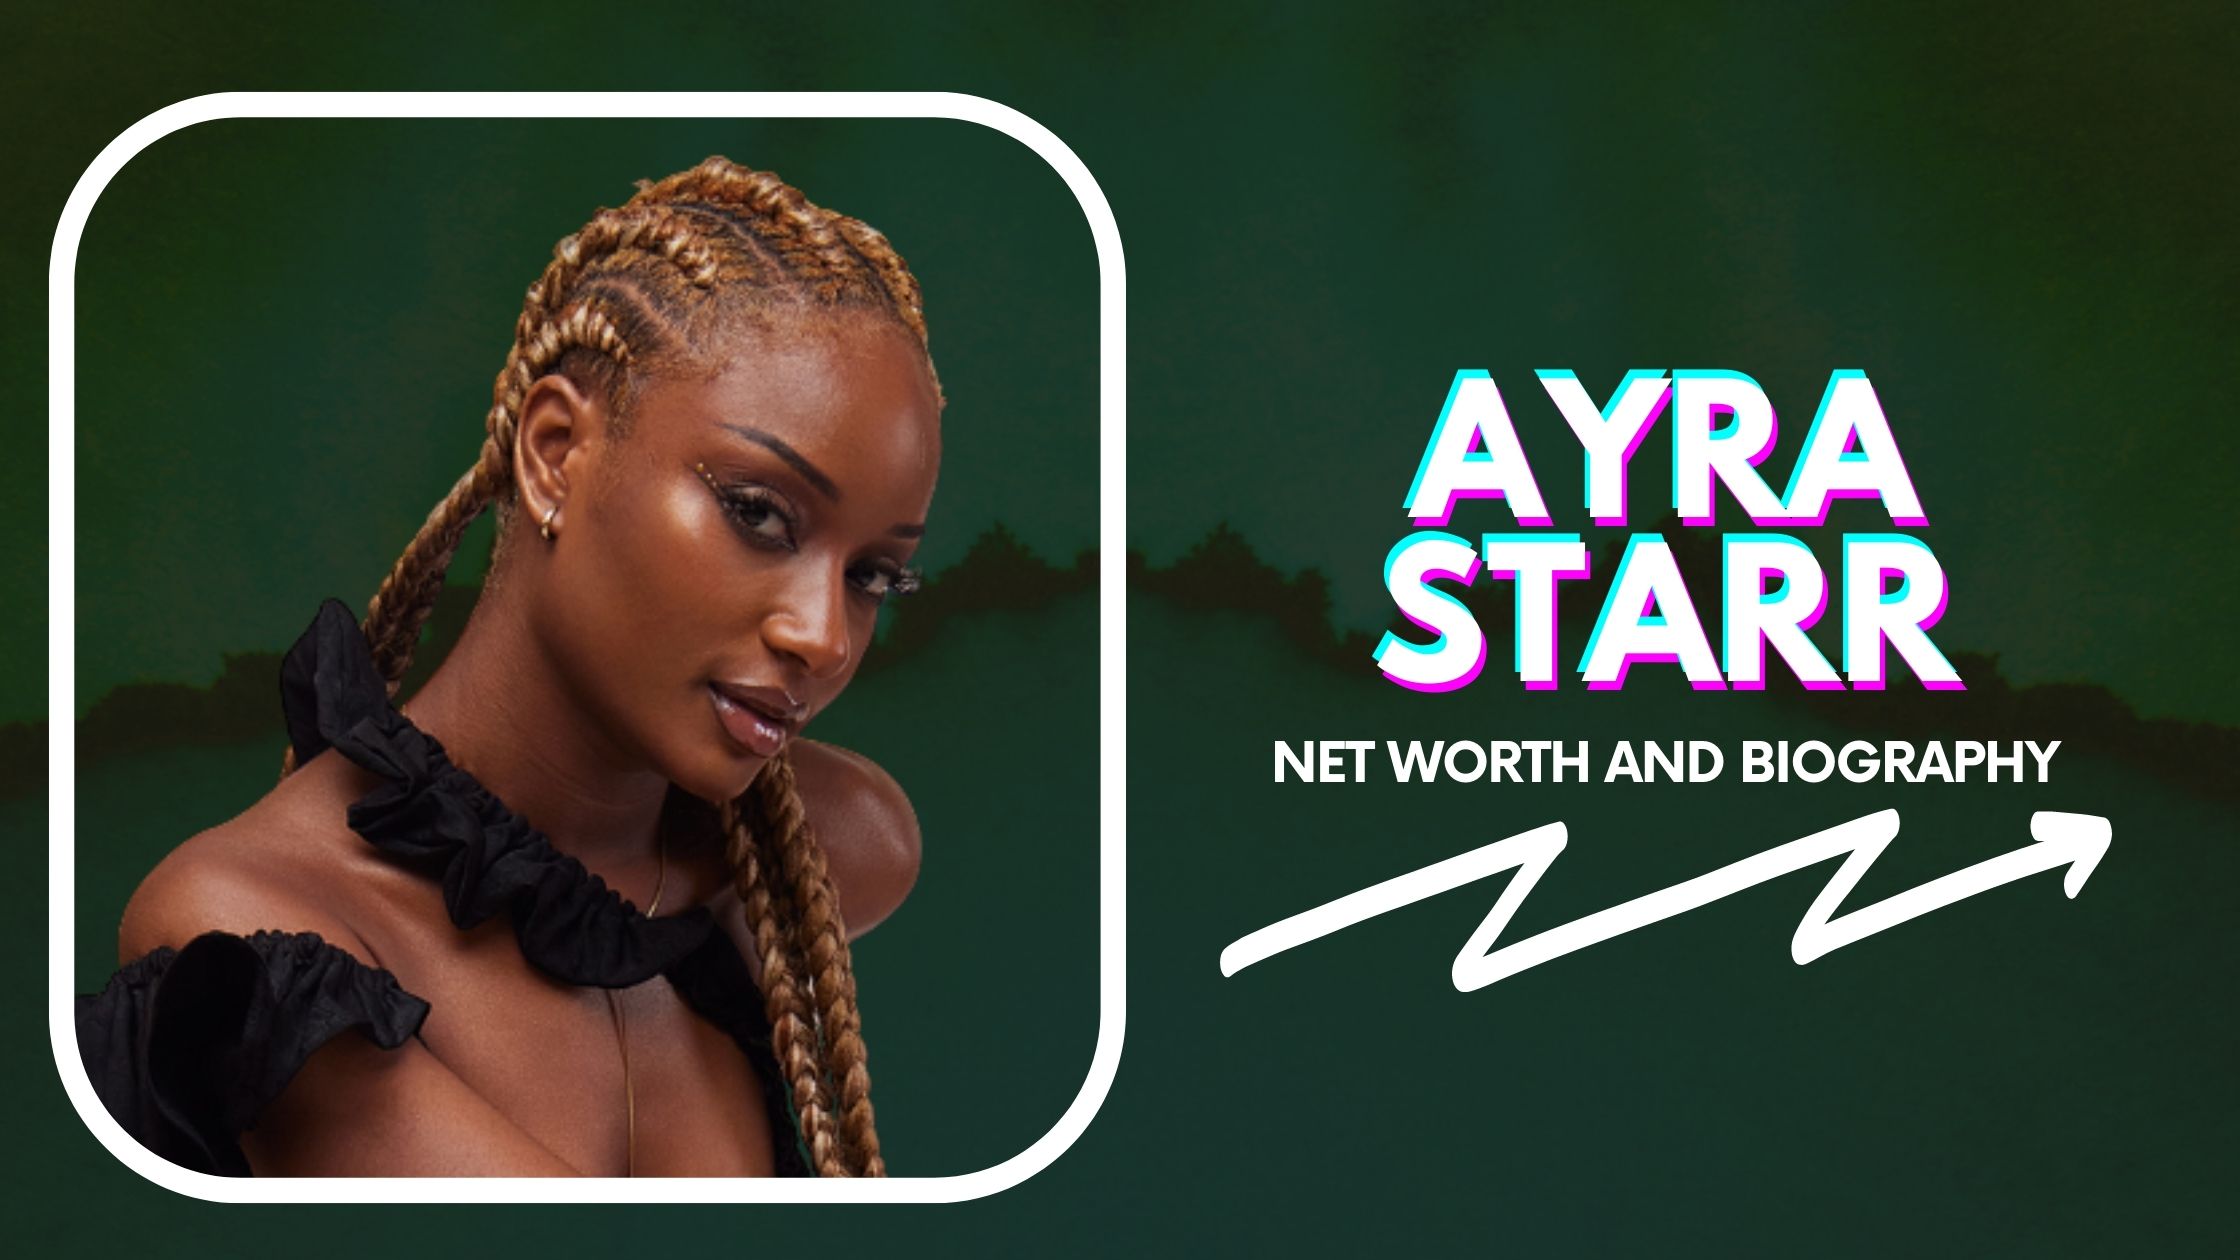 Ayra Starr Net Worth And Biography (2022)